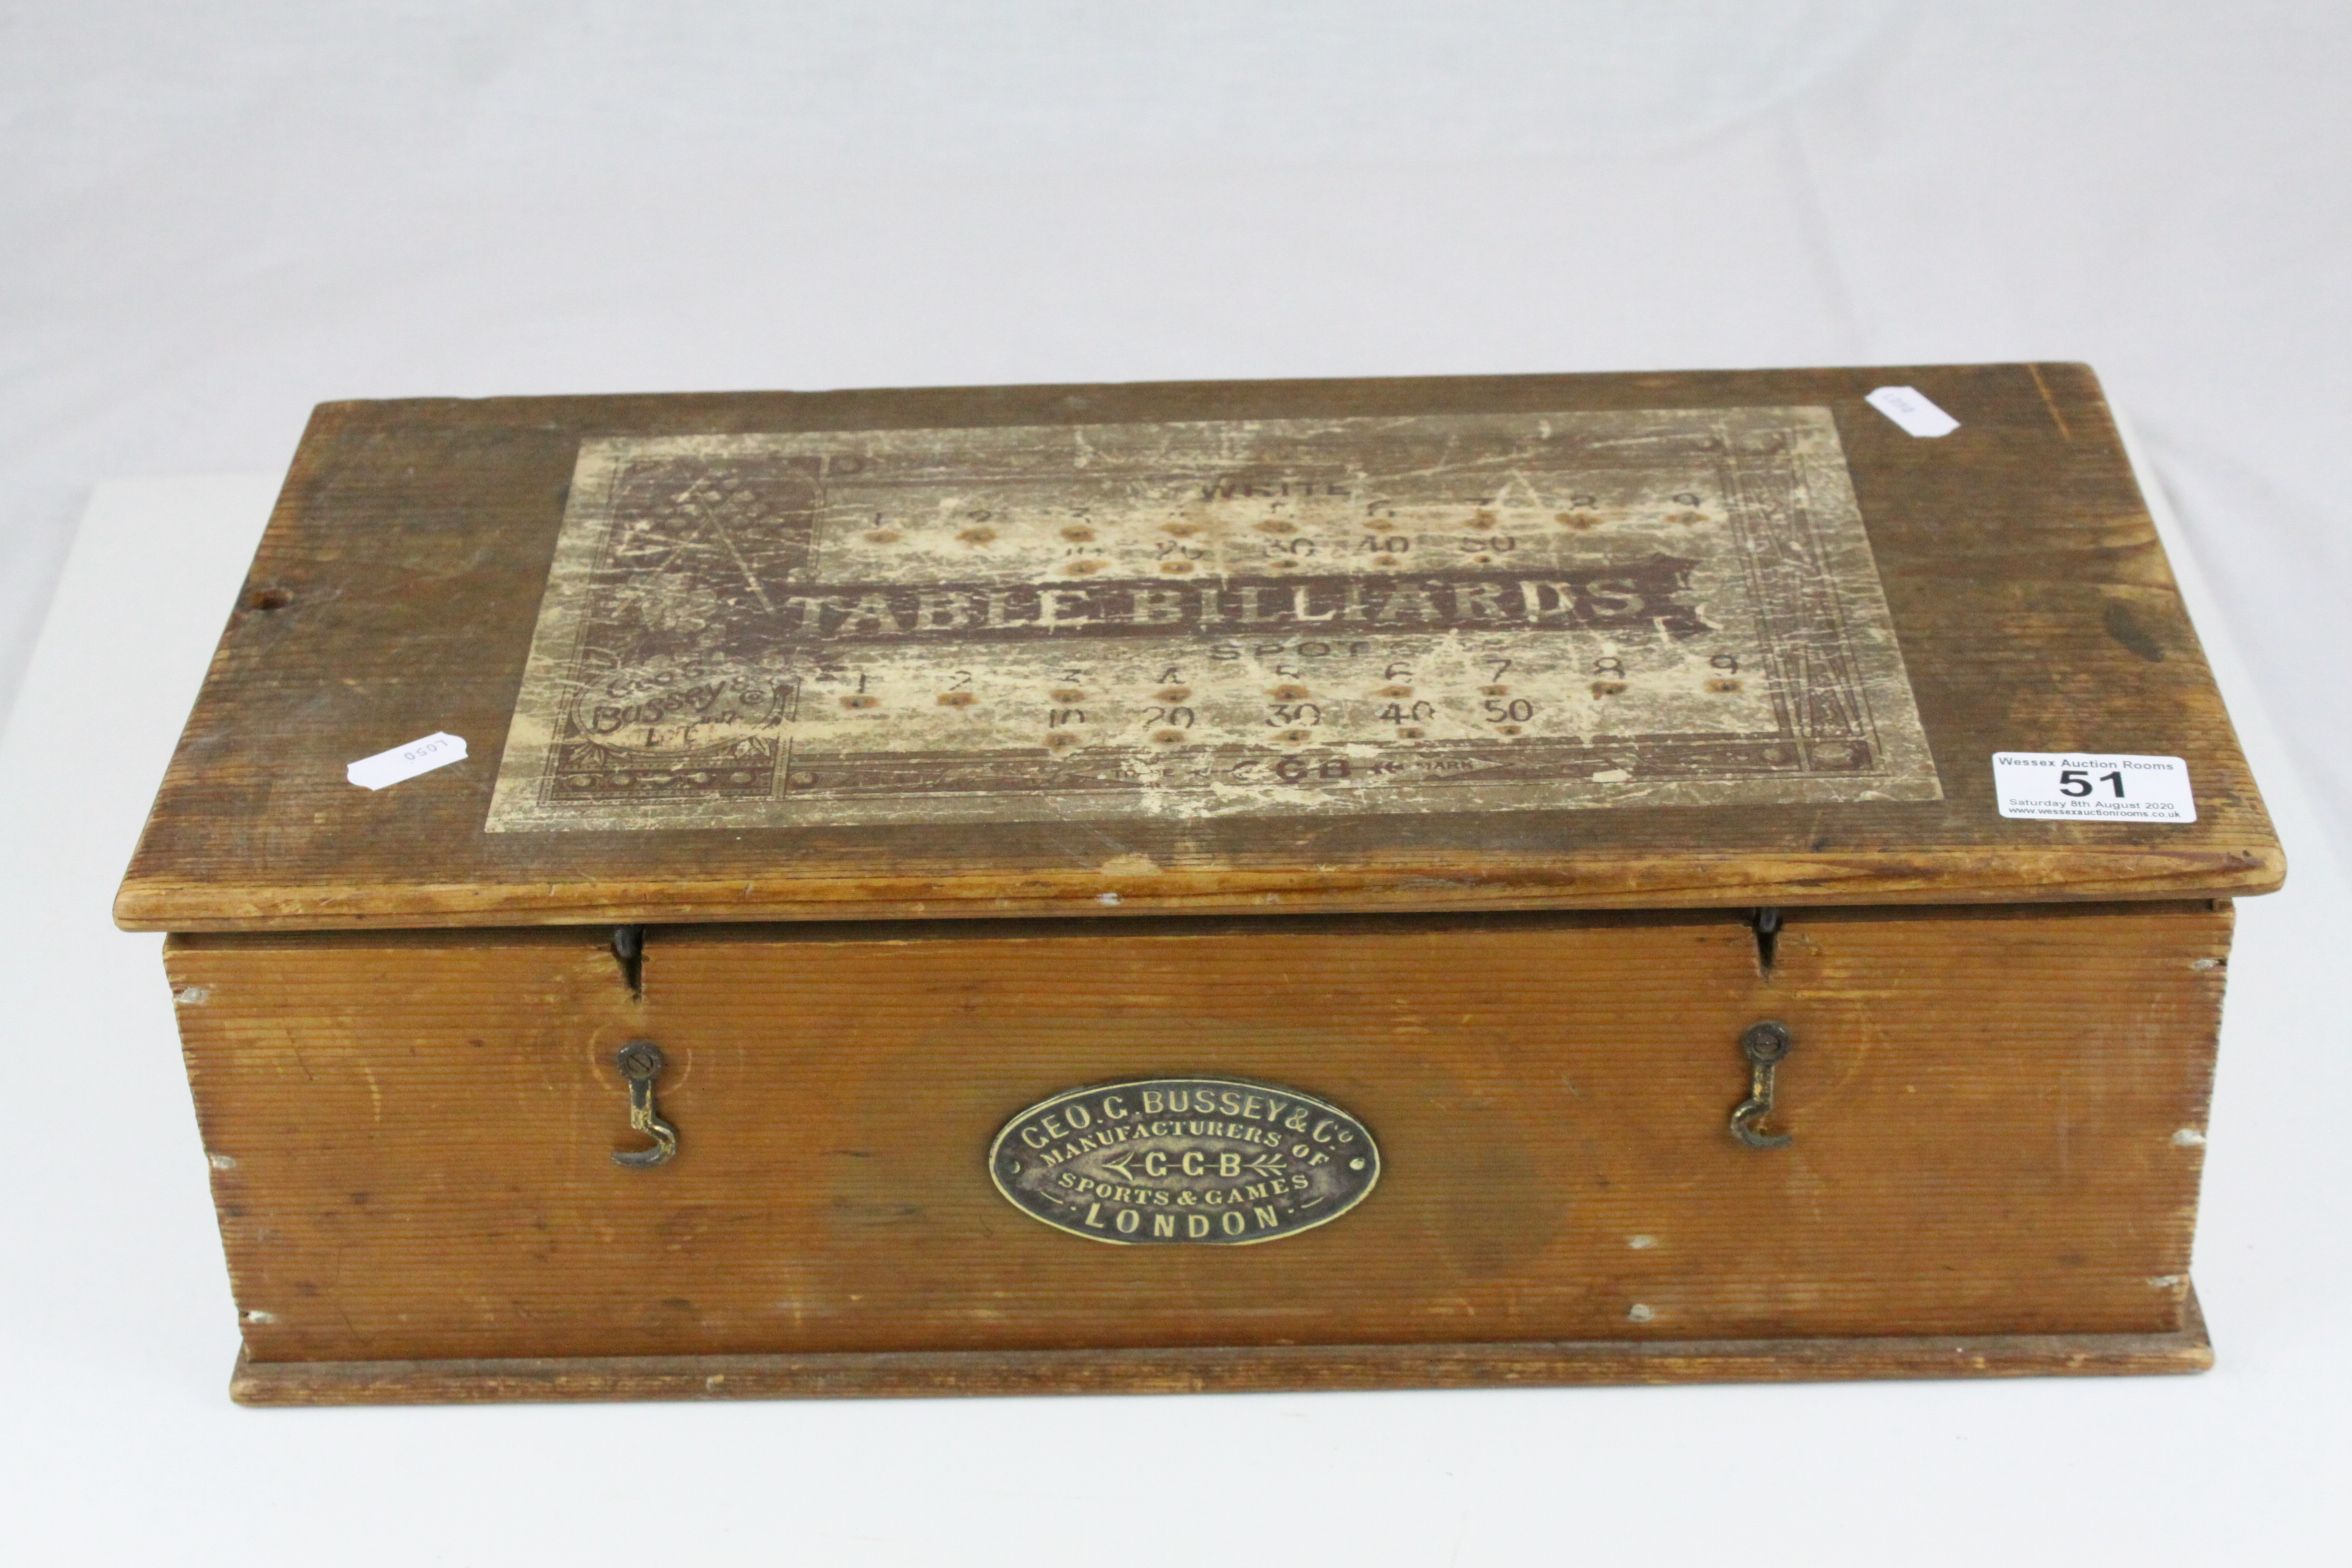 George C Bussey & Co Table Billards Set contained within it's original Pine Box with Brass Plaque to - Image 2 of 8